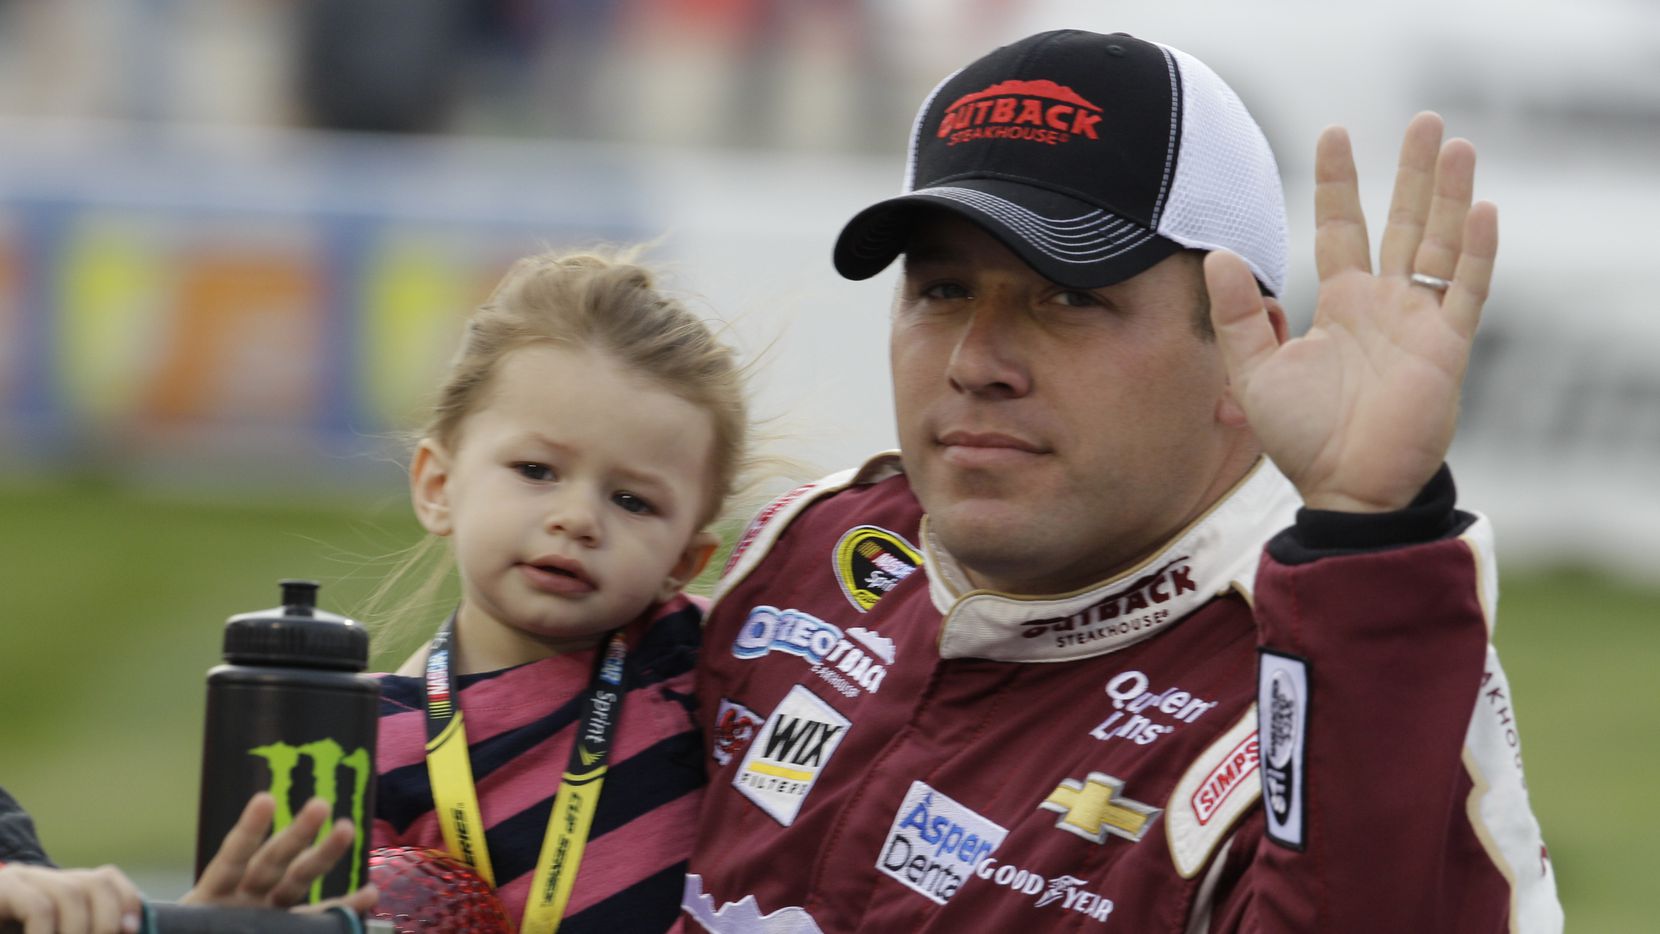 Ryan Newman speaks his mind, but leadership may not like message